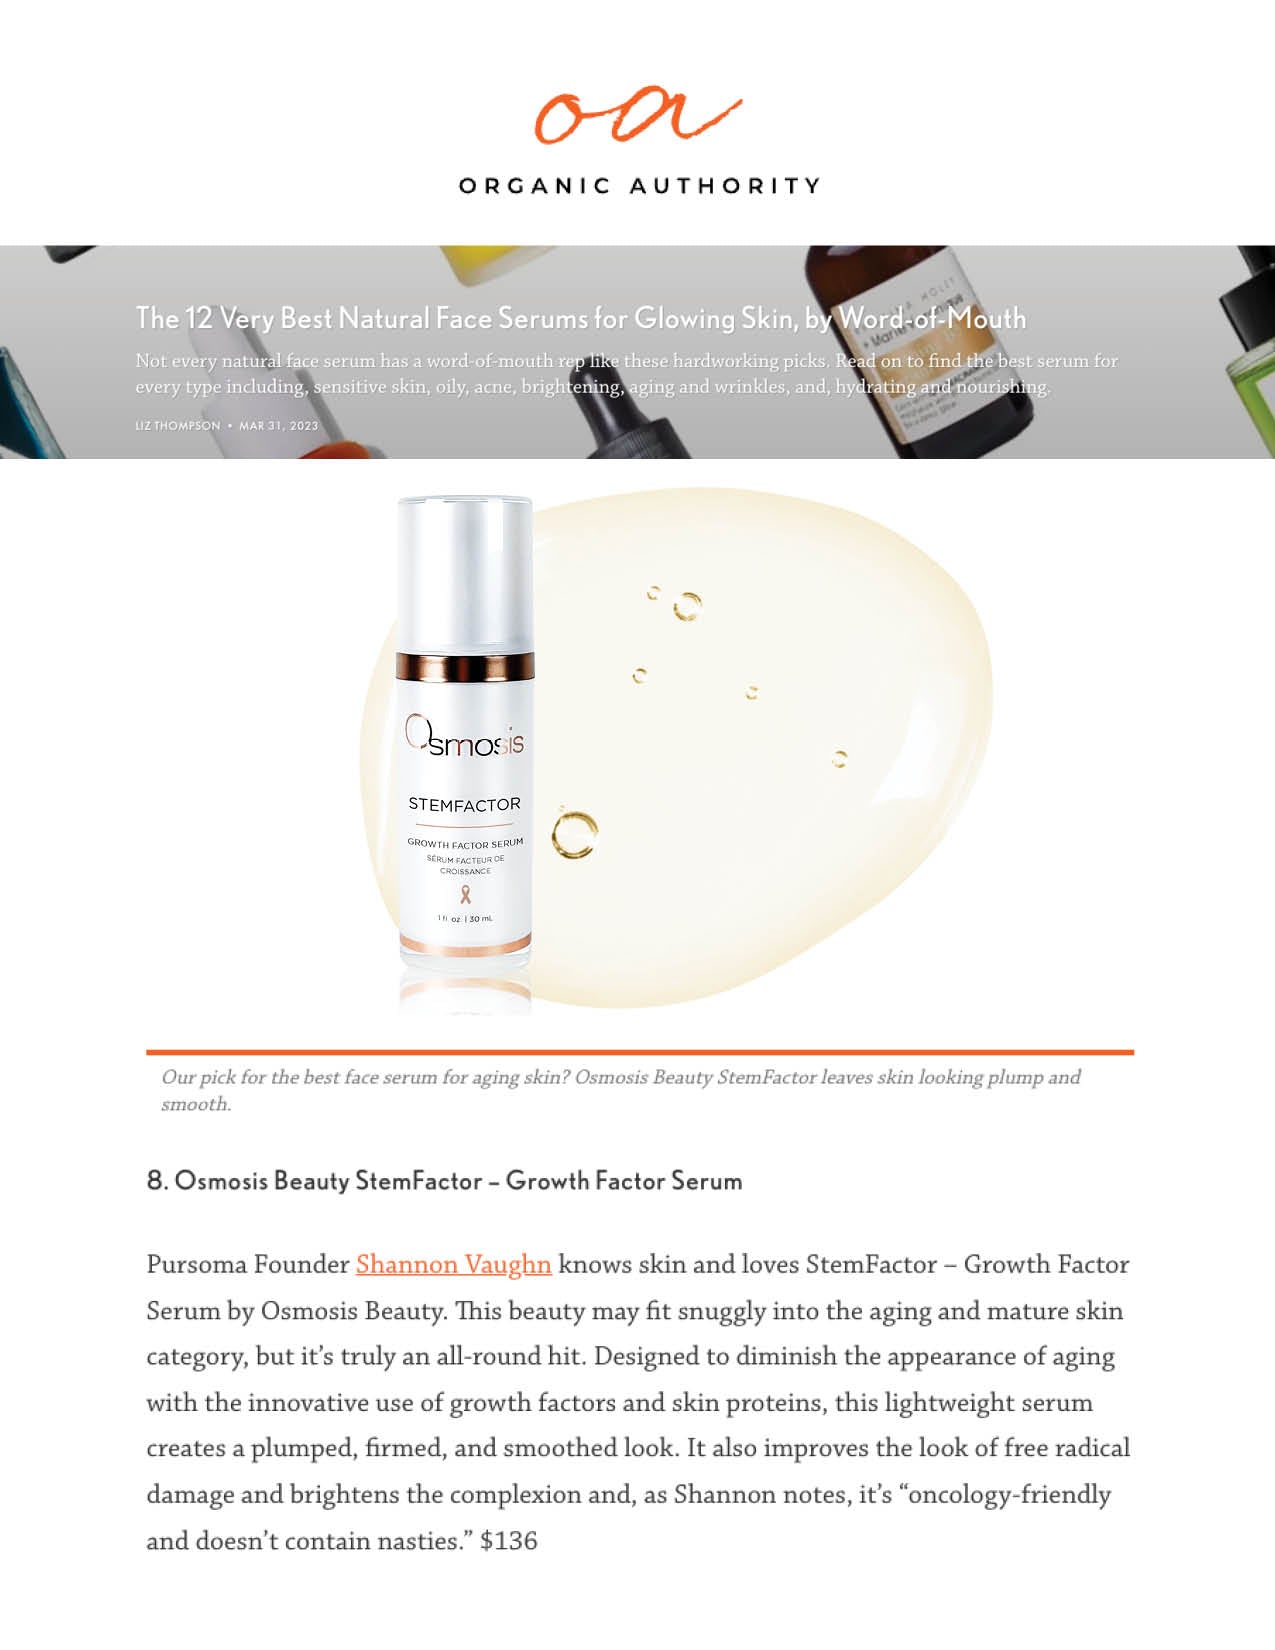 Osmosis Beauty StemFactor is featured in Organic Authority in a story titled - The 12 Very Best Natural Face Serums for Glowing Skin, by Word-of-Mouth.